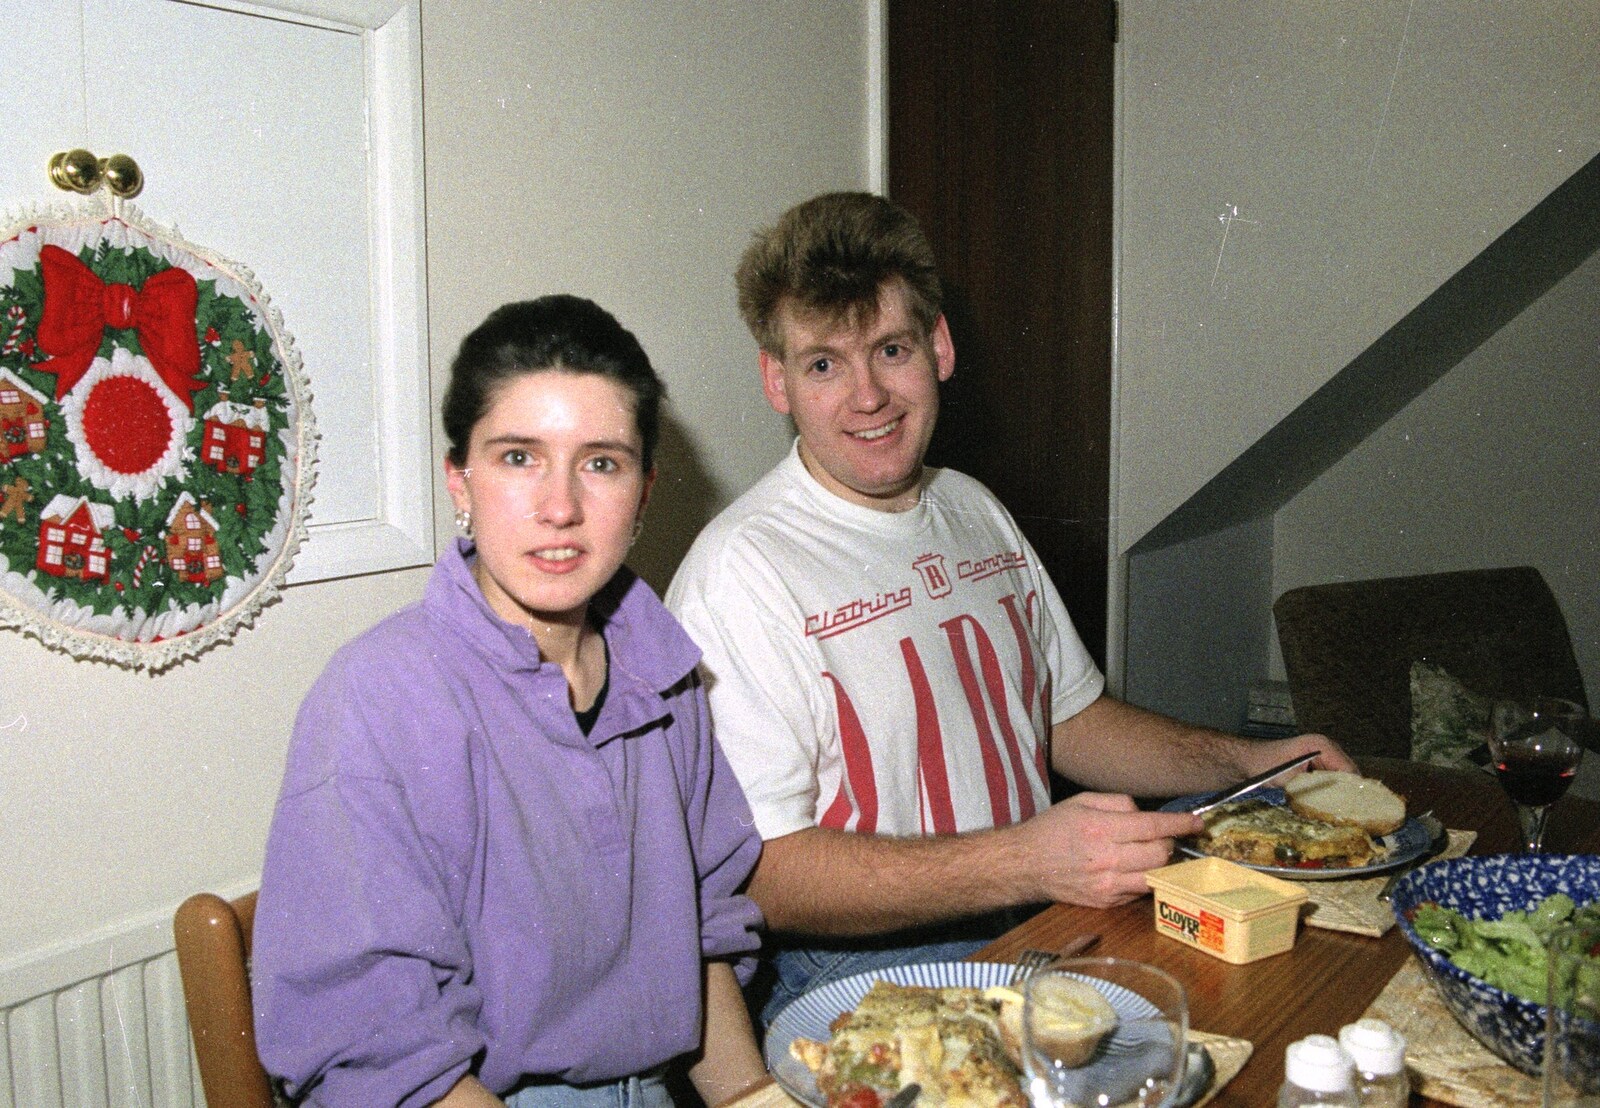 Richard and his girlfriend from Late Night, and Christmas with the Coxes, Needham, Norfolk - 25th December 1989